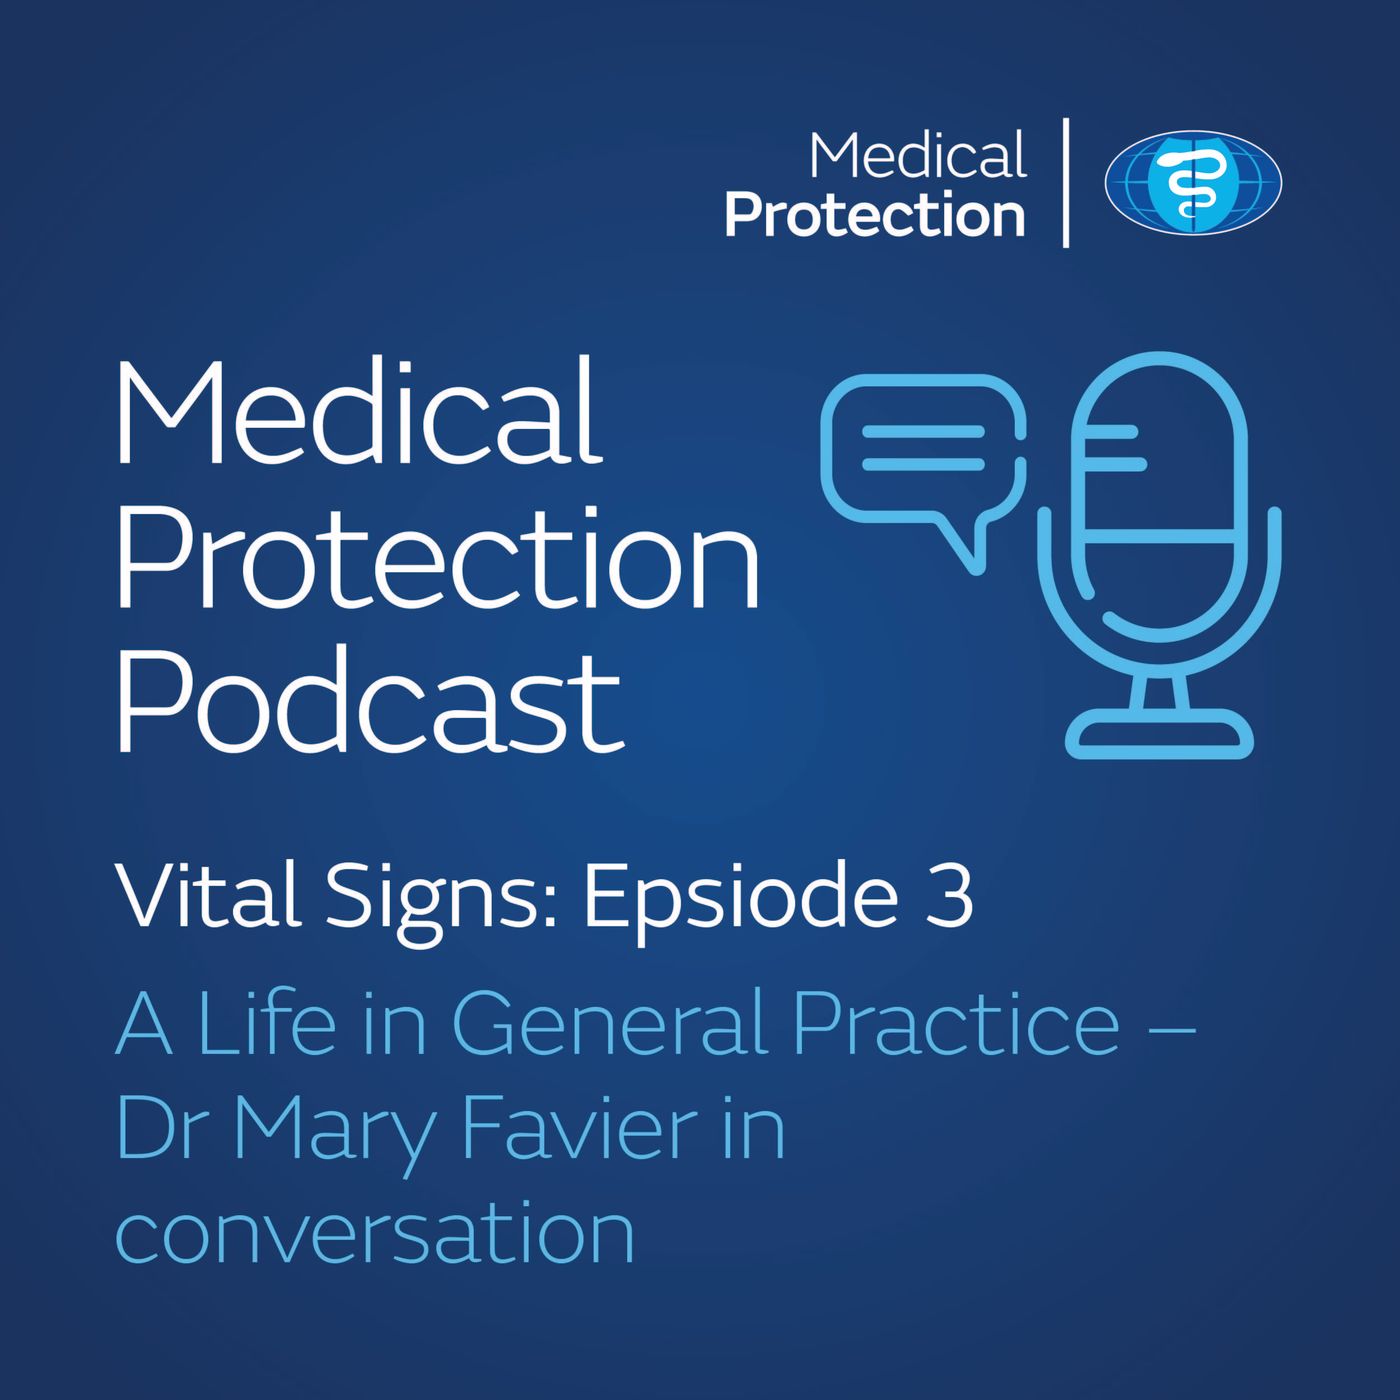 Vital Signs episode 3: A Life in General Practice – Dr Mary Favier in conversation